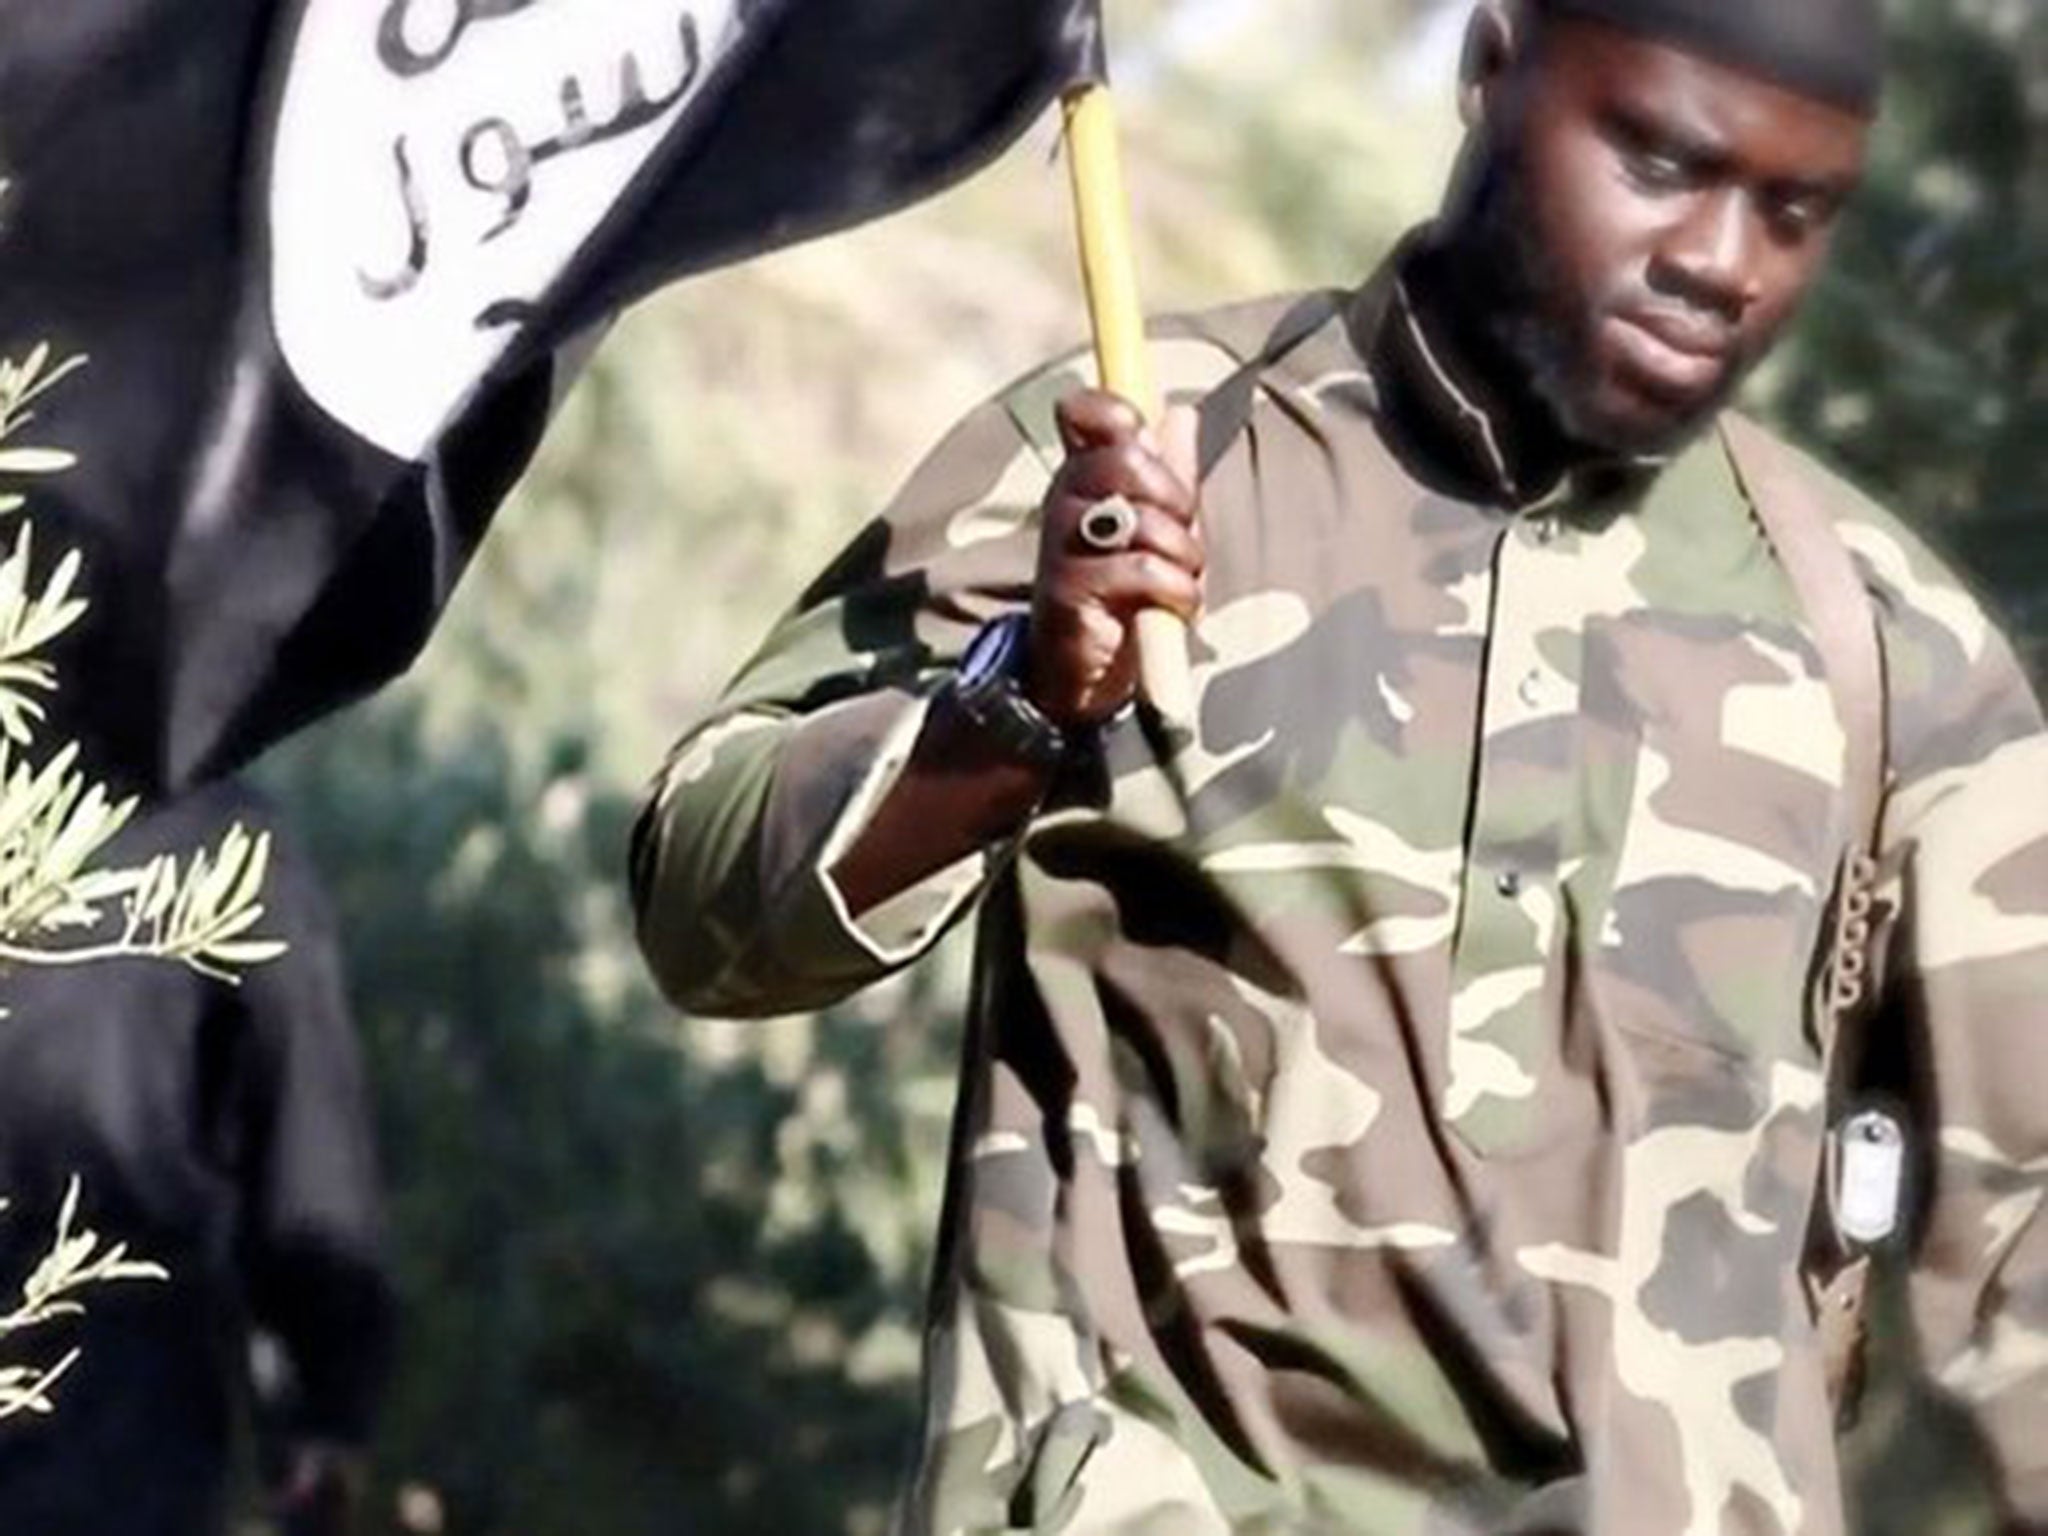 Harry Sarfo’s appearance in an Isis propaganda video issued in August 2015, where two prisoners were executed by militants